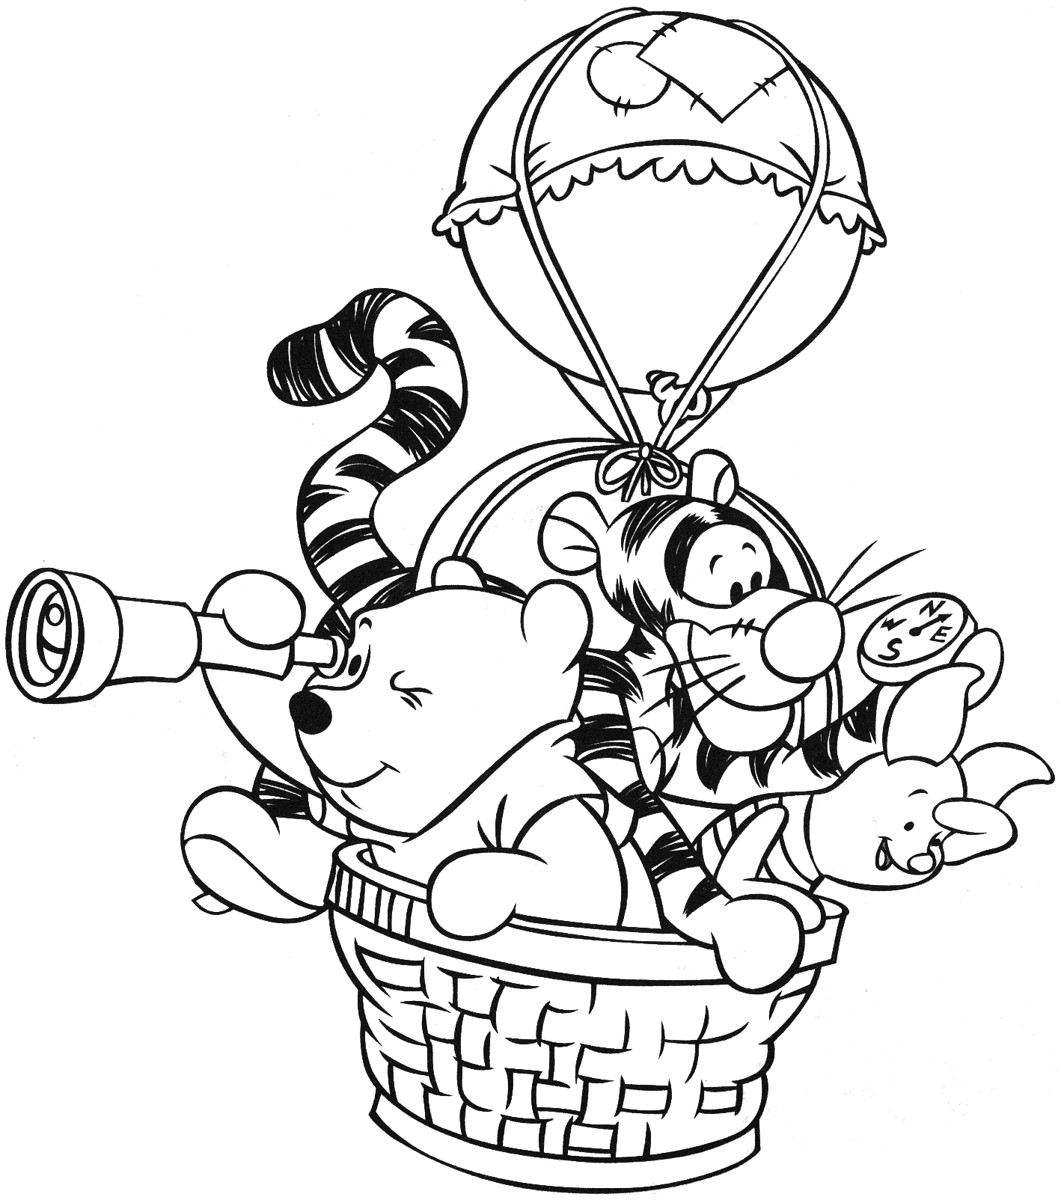 Winnie The Pooh Printable Coloring Pages
 winnie the pooh coloring page